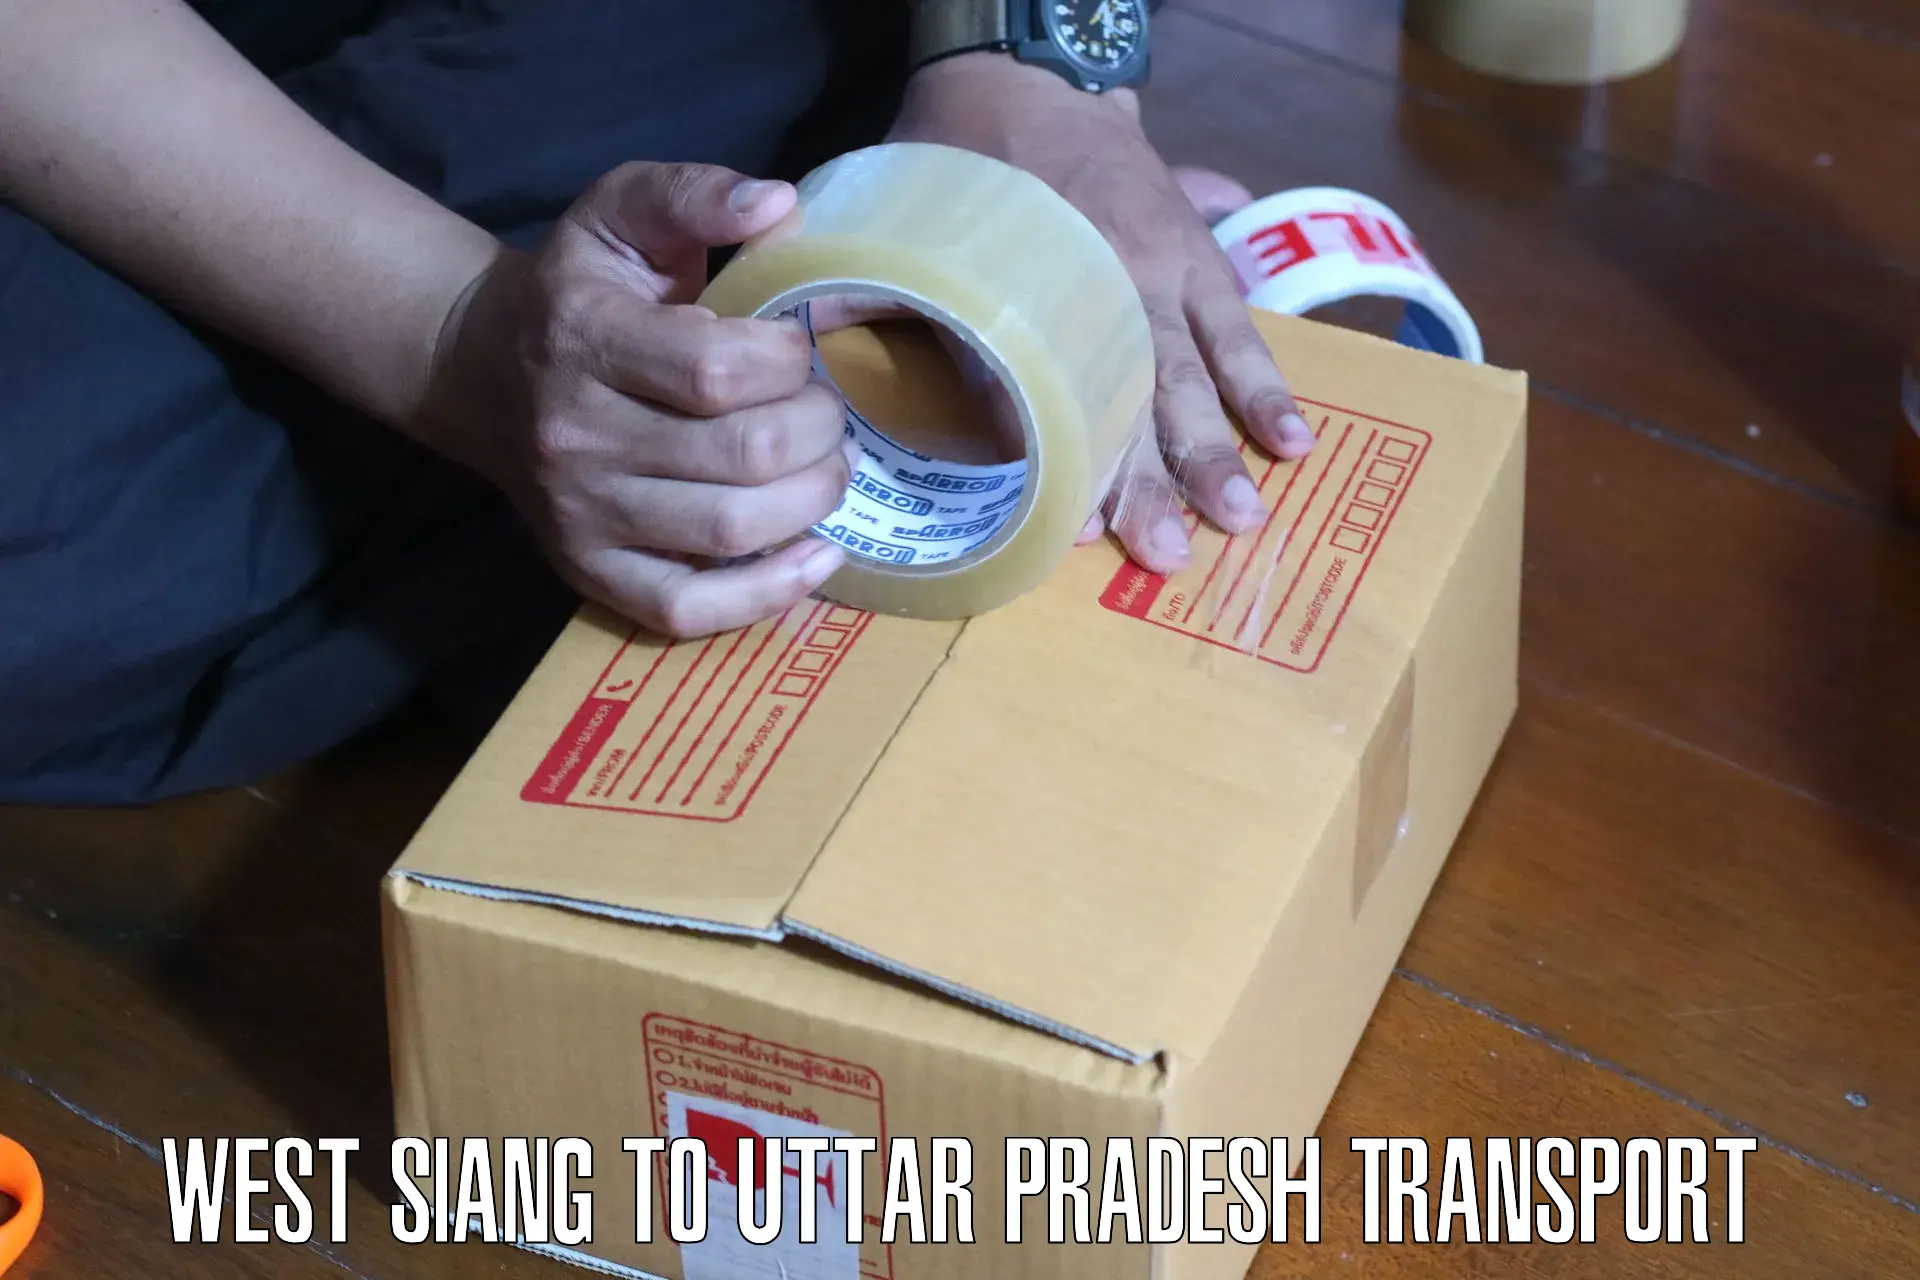 Daily parcel service transport West Siang to Uttar Pradesh